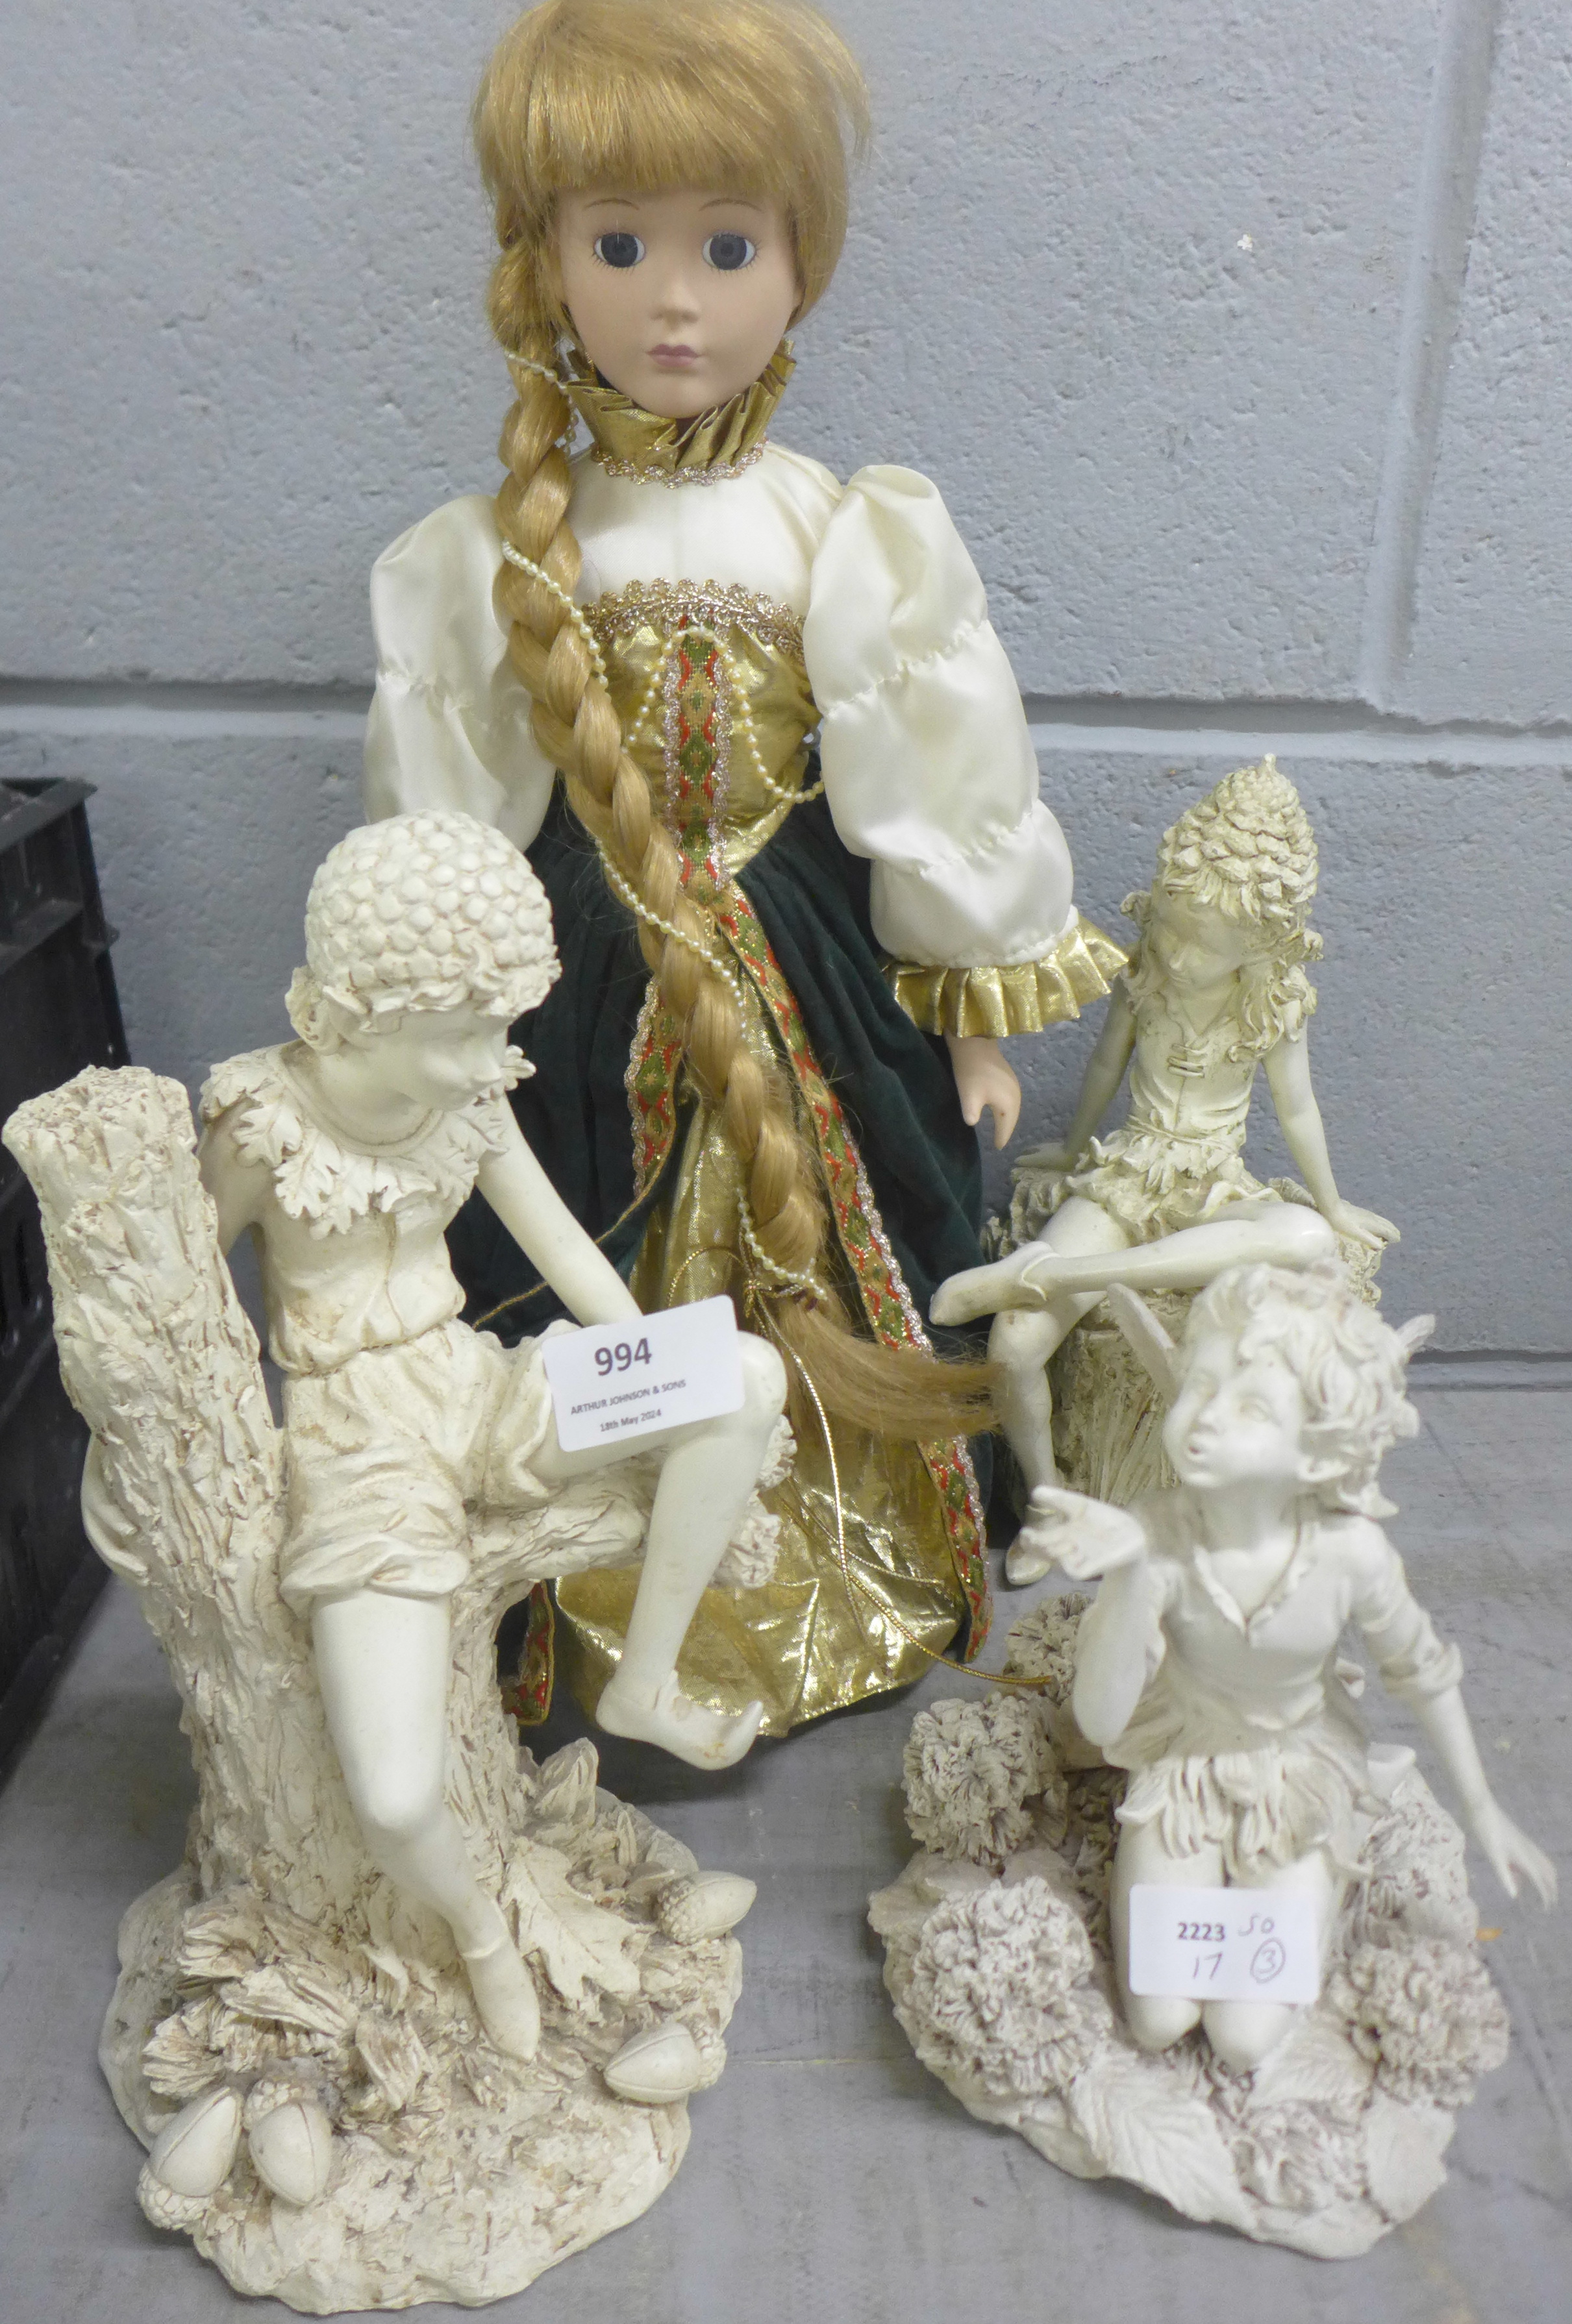 Three models of Pixies by Shudehill and a Rapunzel doll